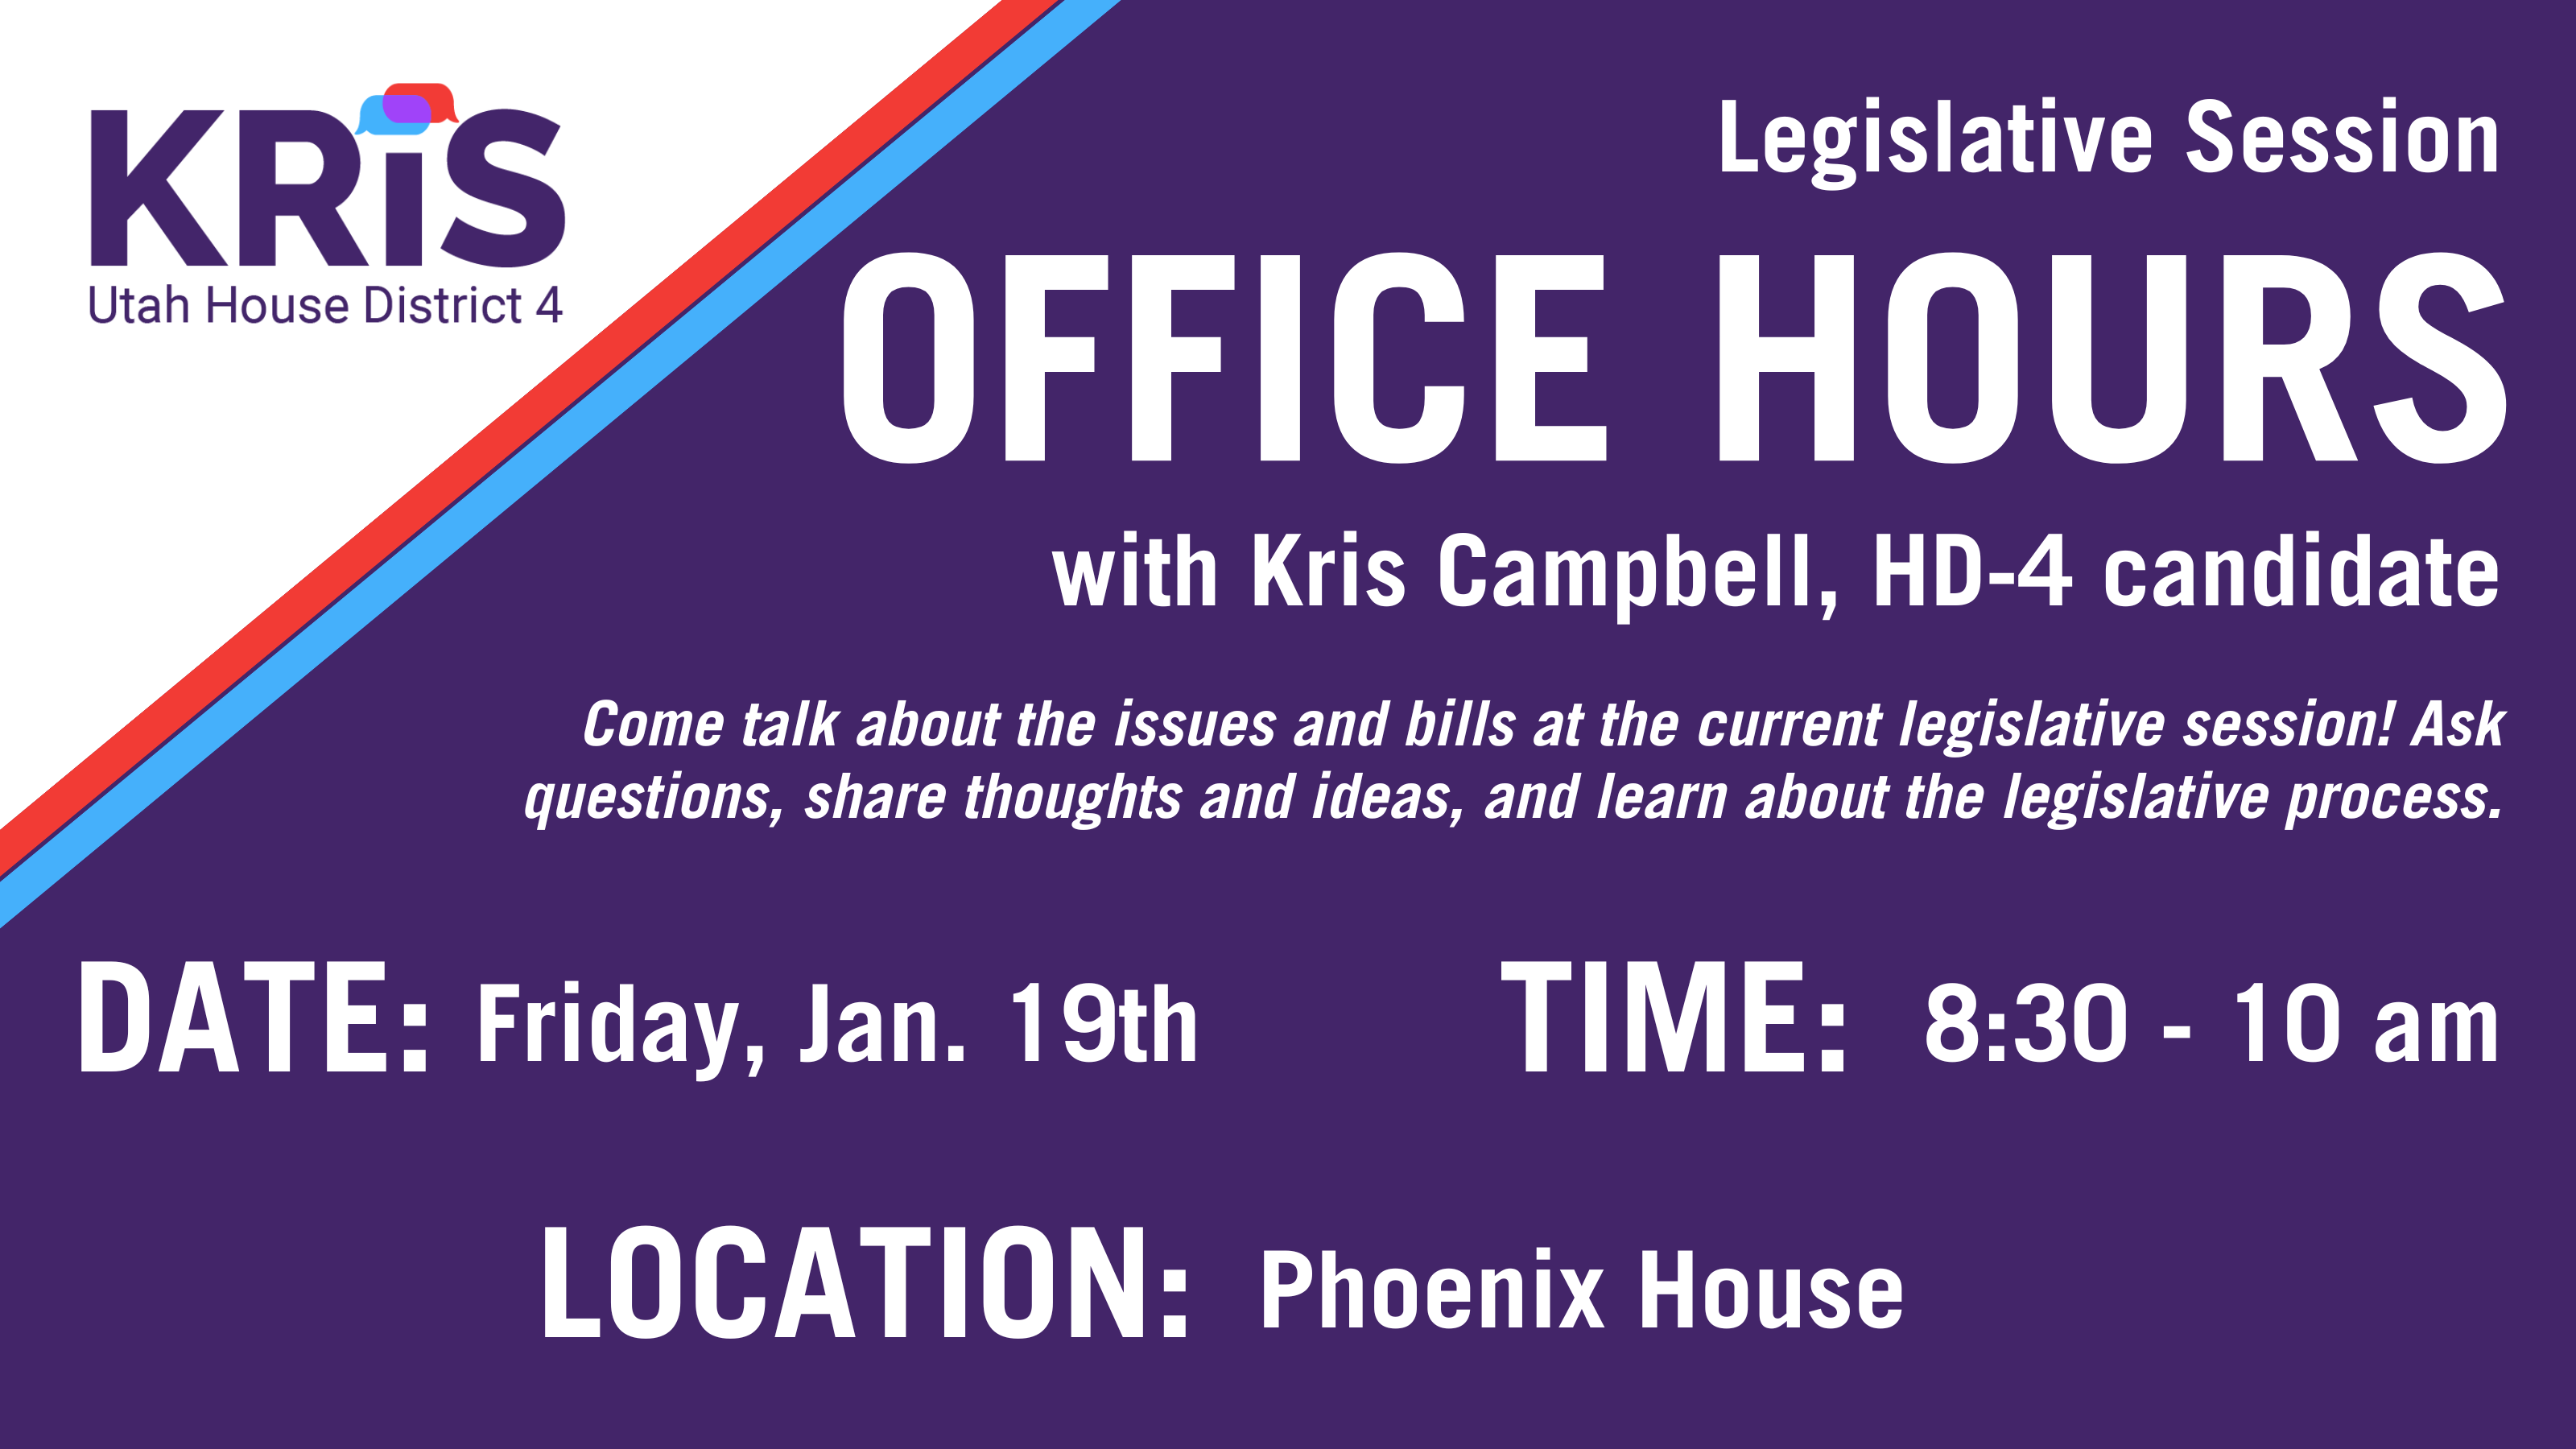 Legislative Session Office Hours with Kris Campbell, HD 4 Candidate. Friday, Jan 19th from 8:30-10 am at the Phoenix House in Mountain Green